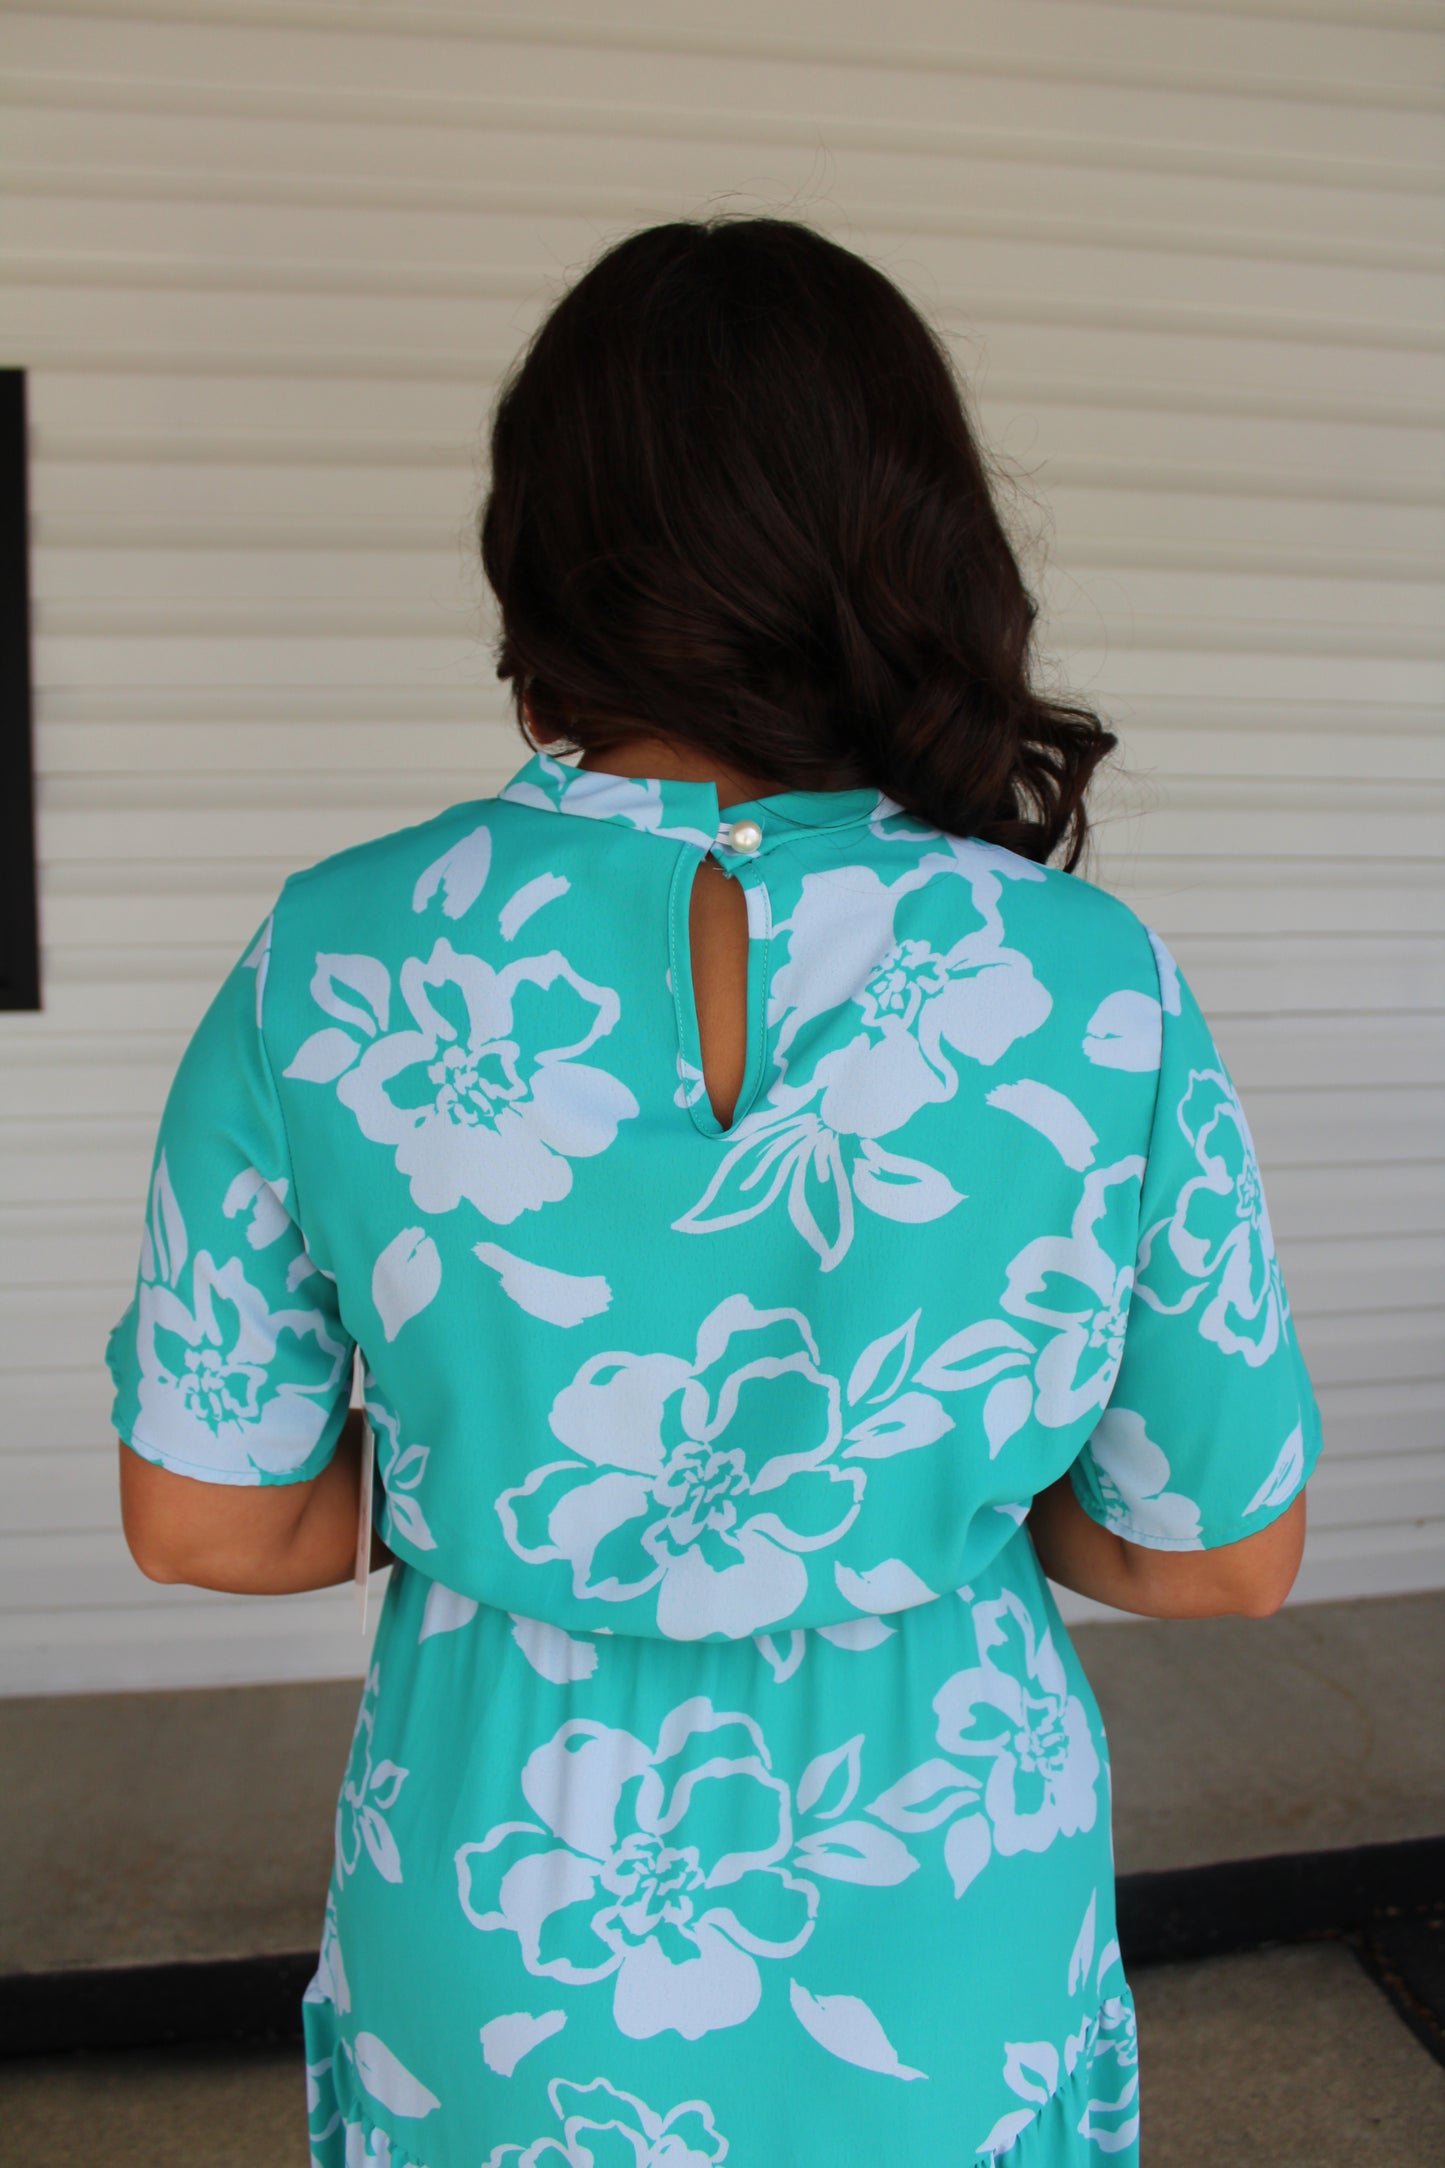 The Marley Teal Floral Print Dress